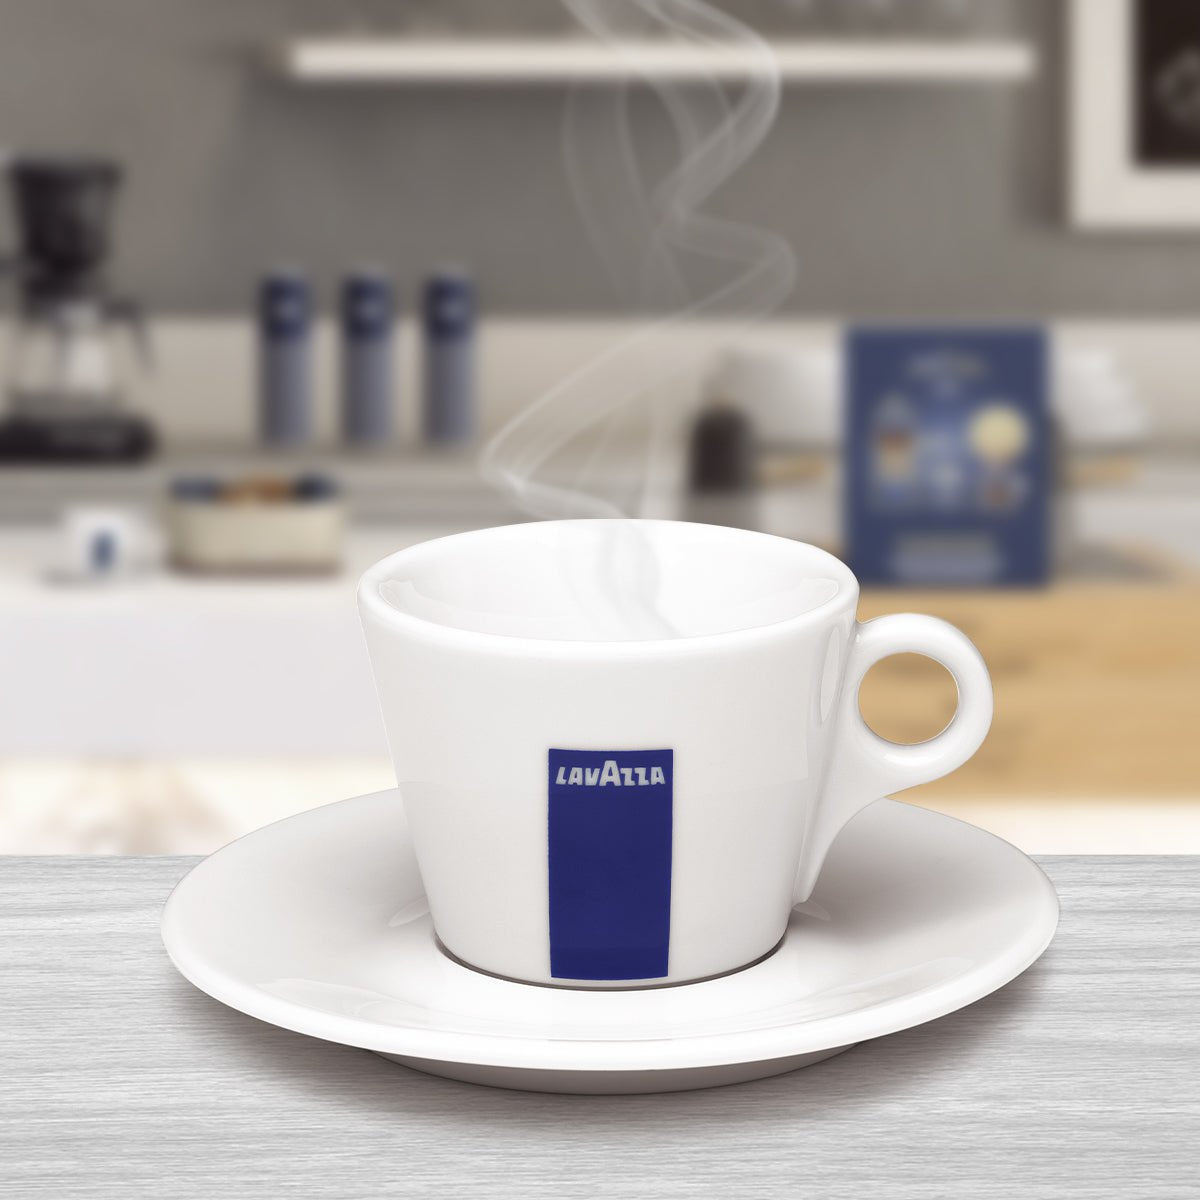 Lavazza Cappuccino Saucer - NWT FM SOLUTIONS - YOUR CATERING WHOLESALER